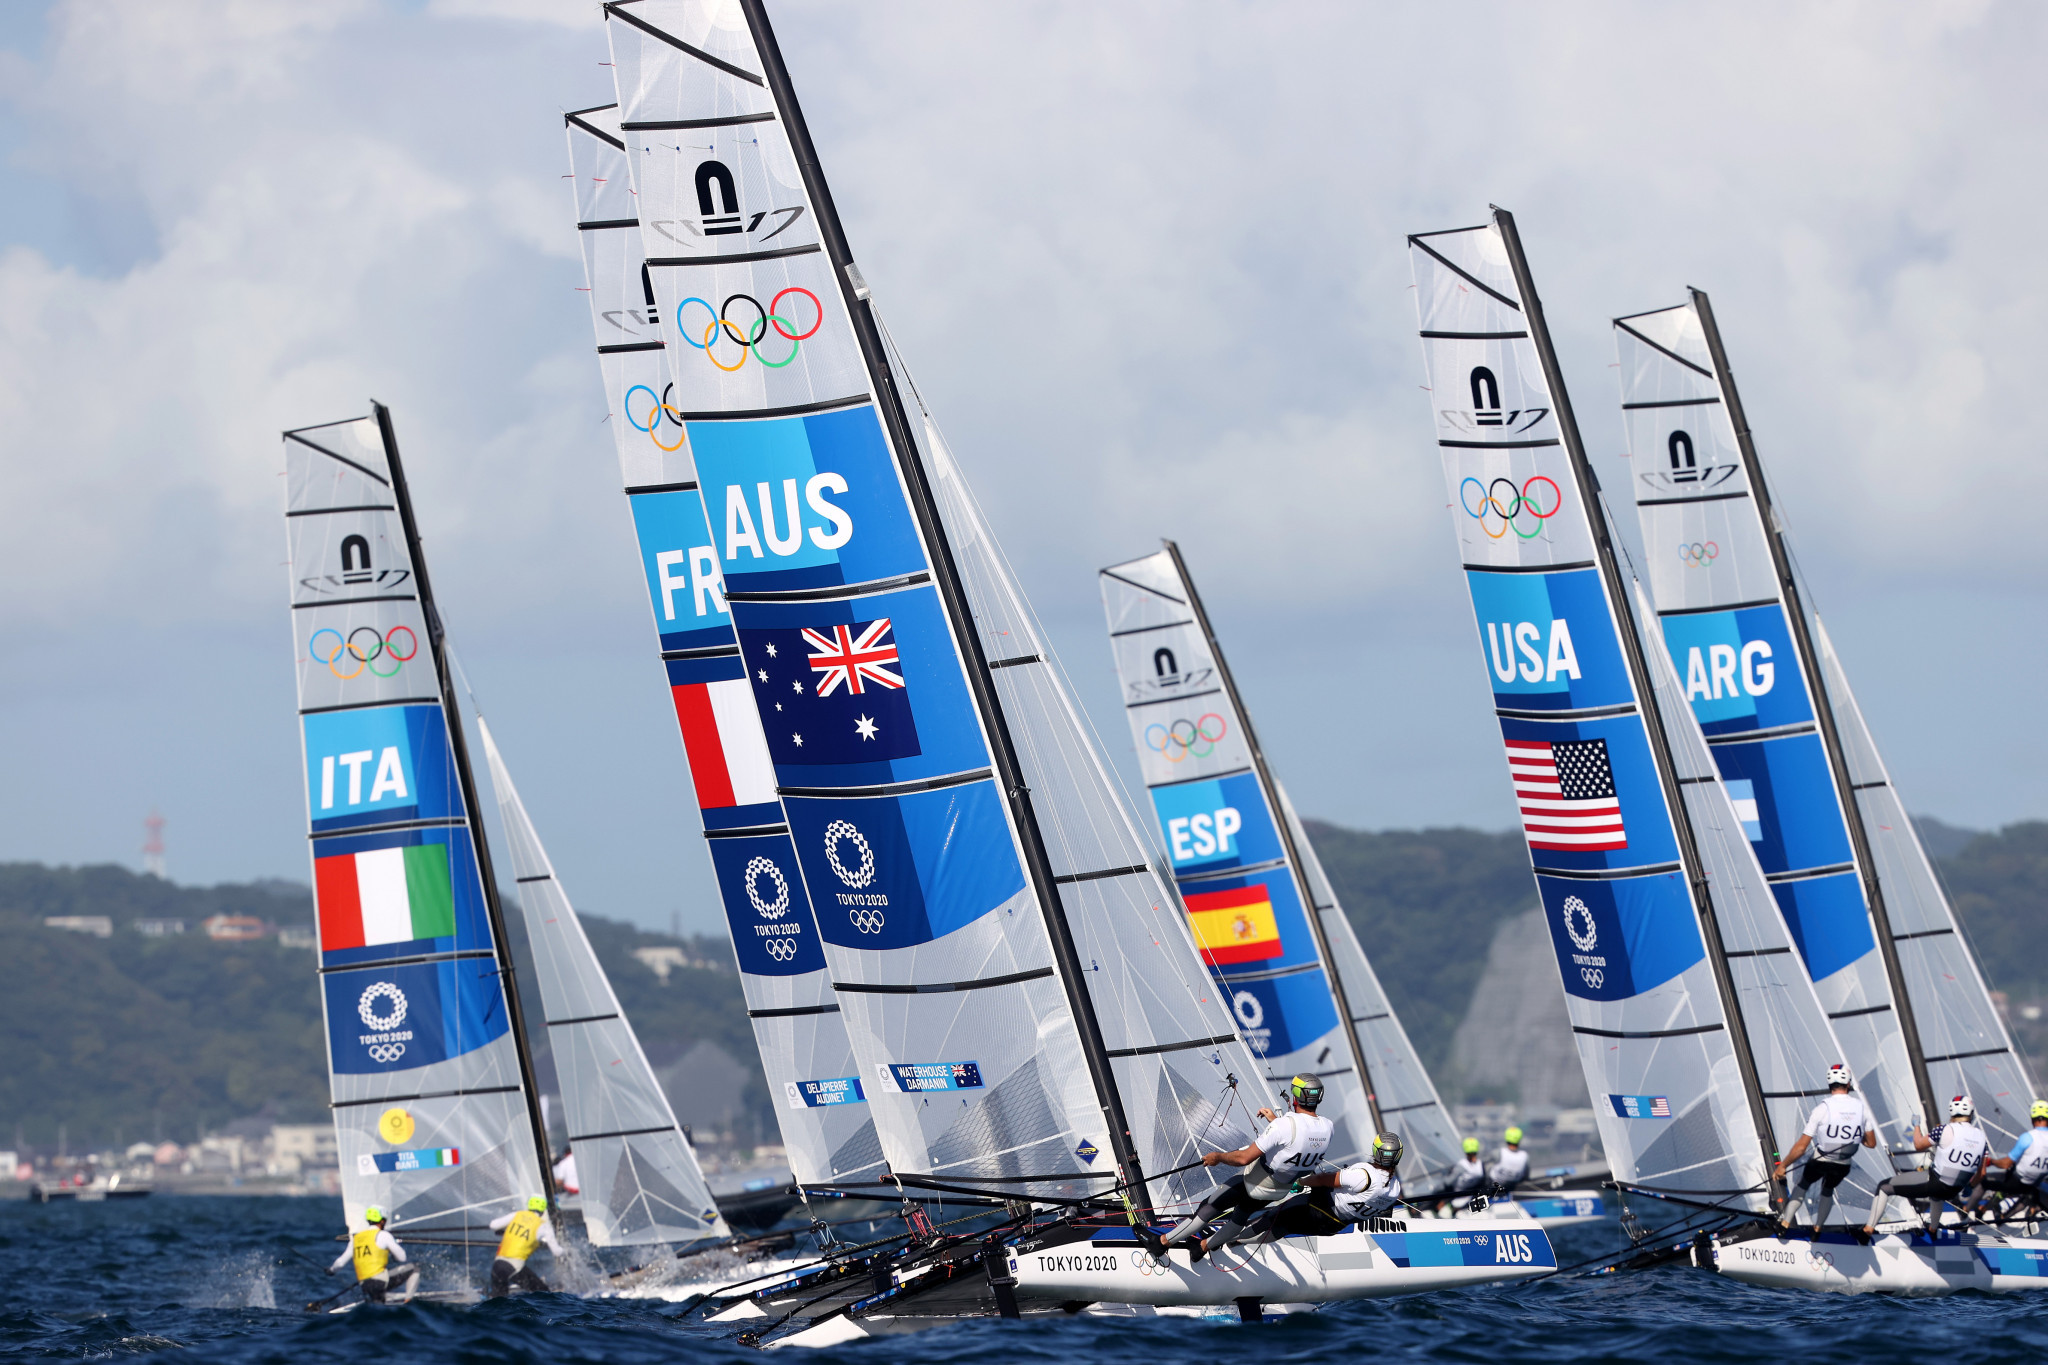 The Nacra 17 class has been retained for LA2028 despite concerns about costs ©Getty Images